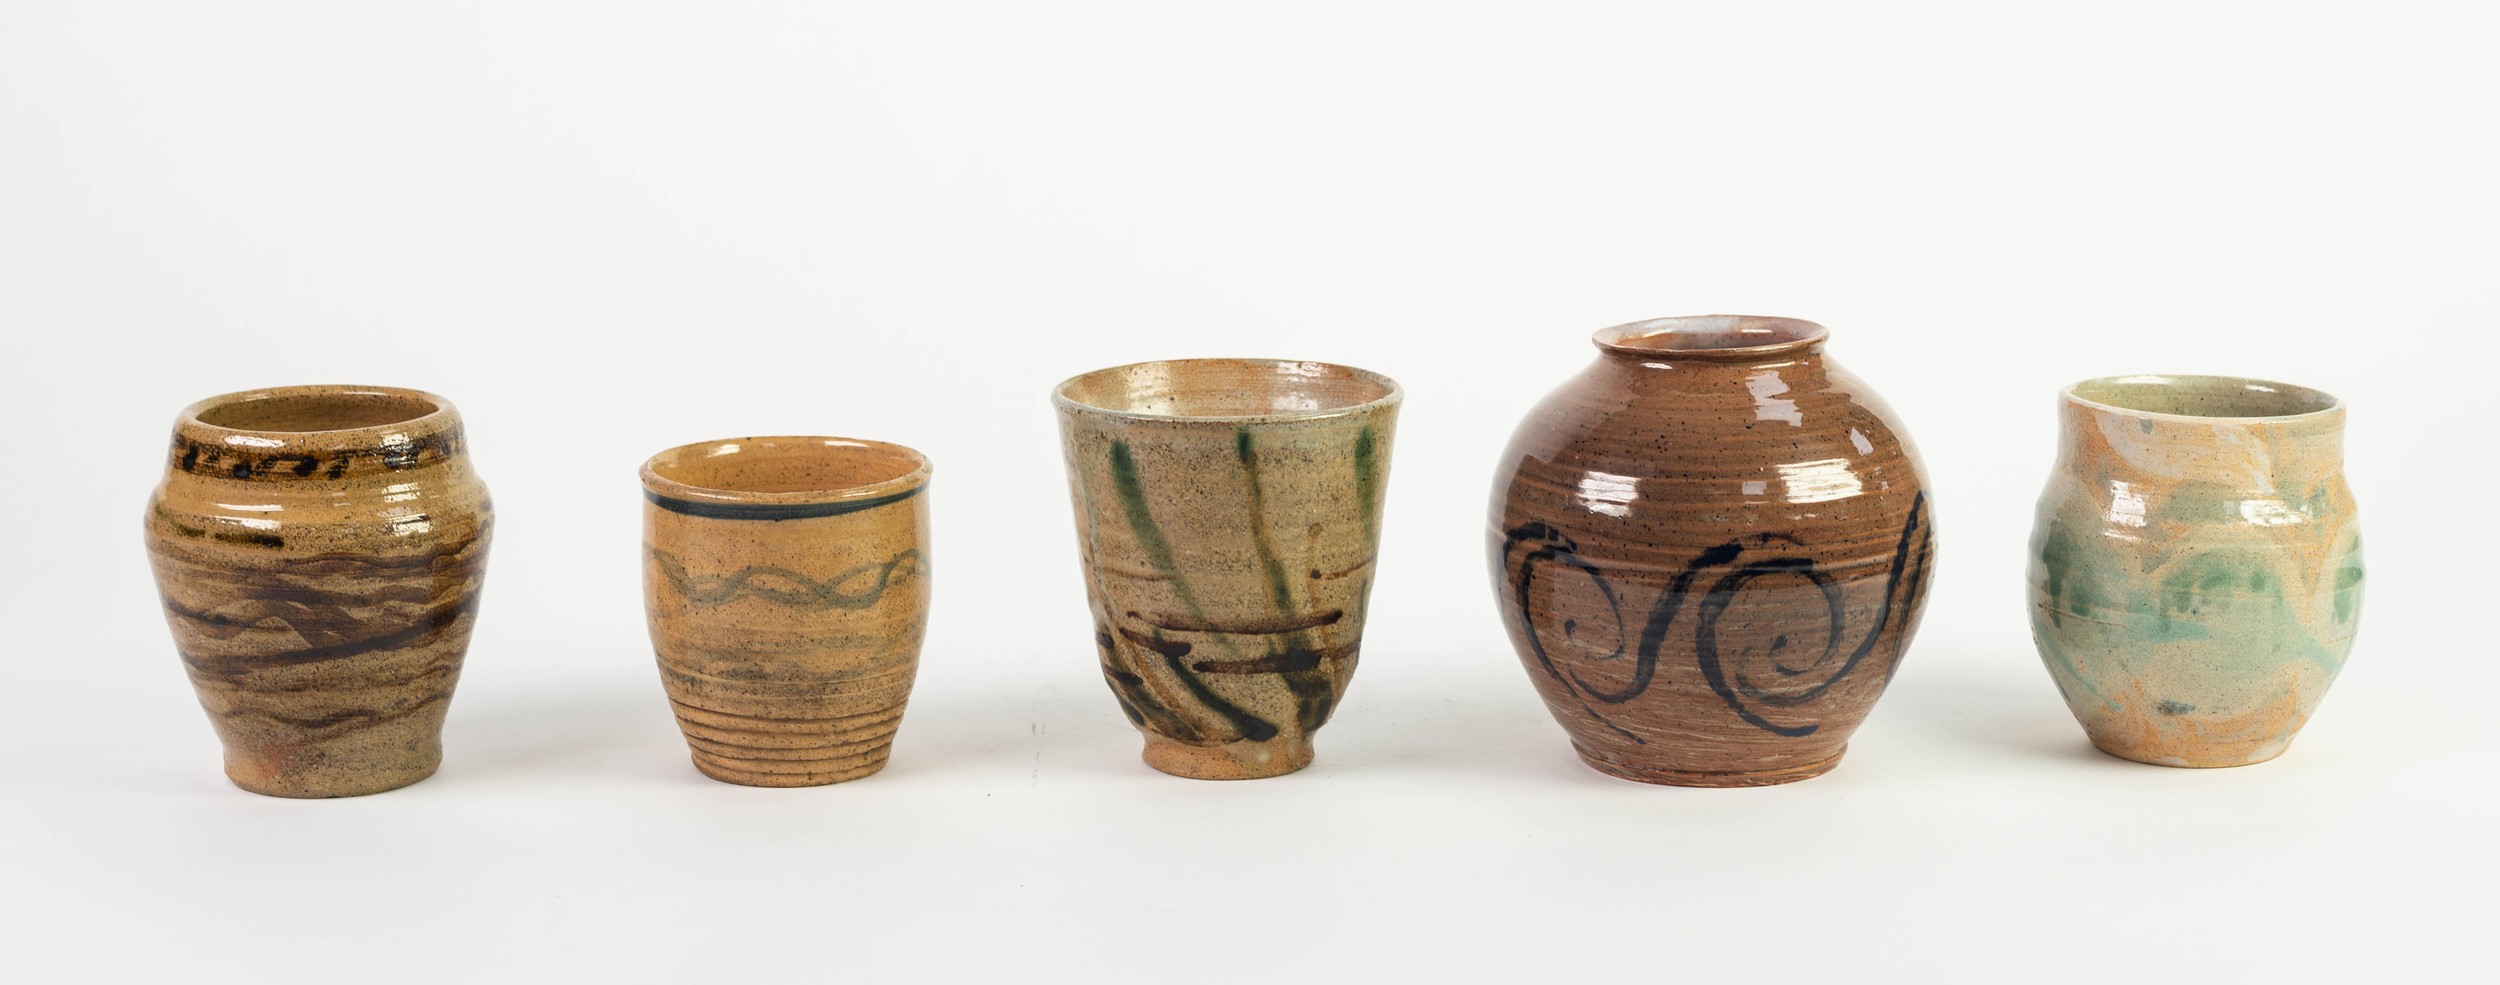 INTERESTING COLLECTION OF FIVE STUDIO POTTERY VASES FROM LANCASTER, DATING FROM THE LATE 1940?S-